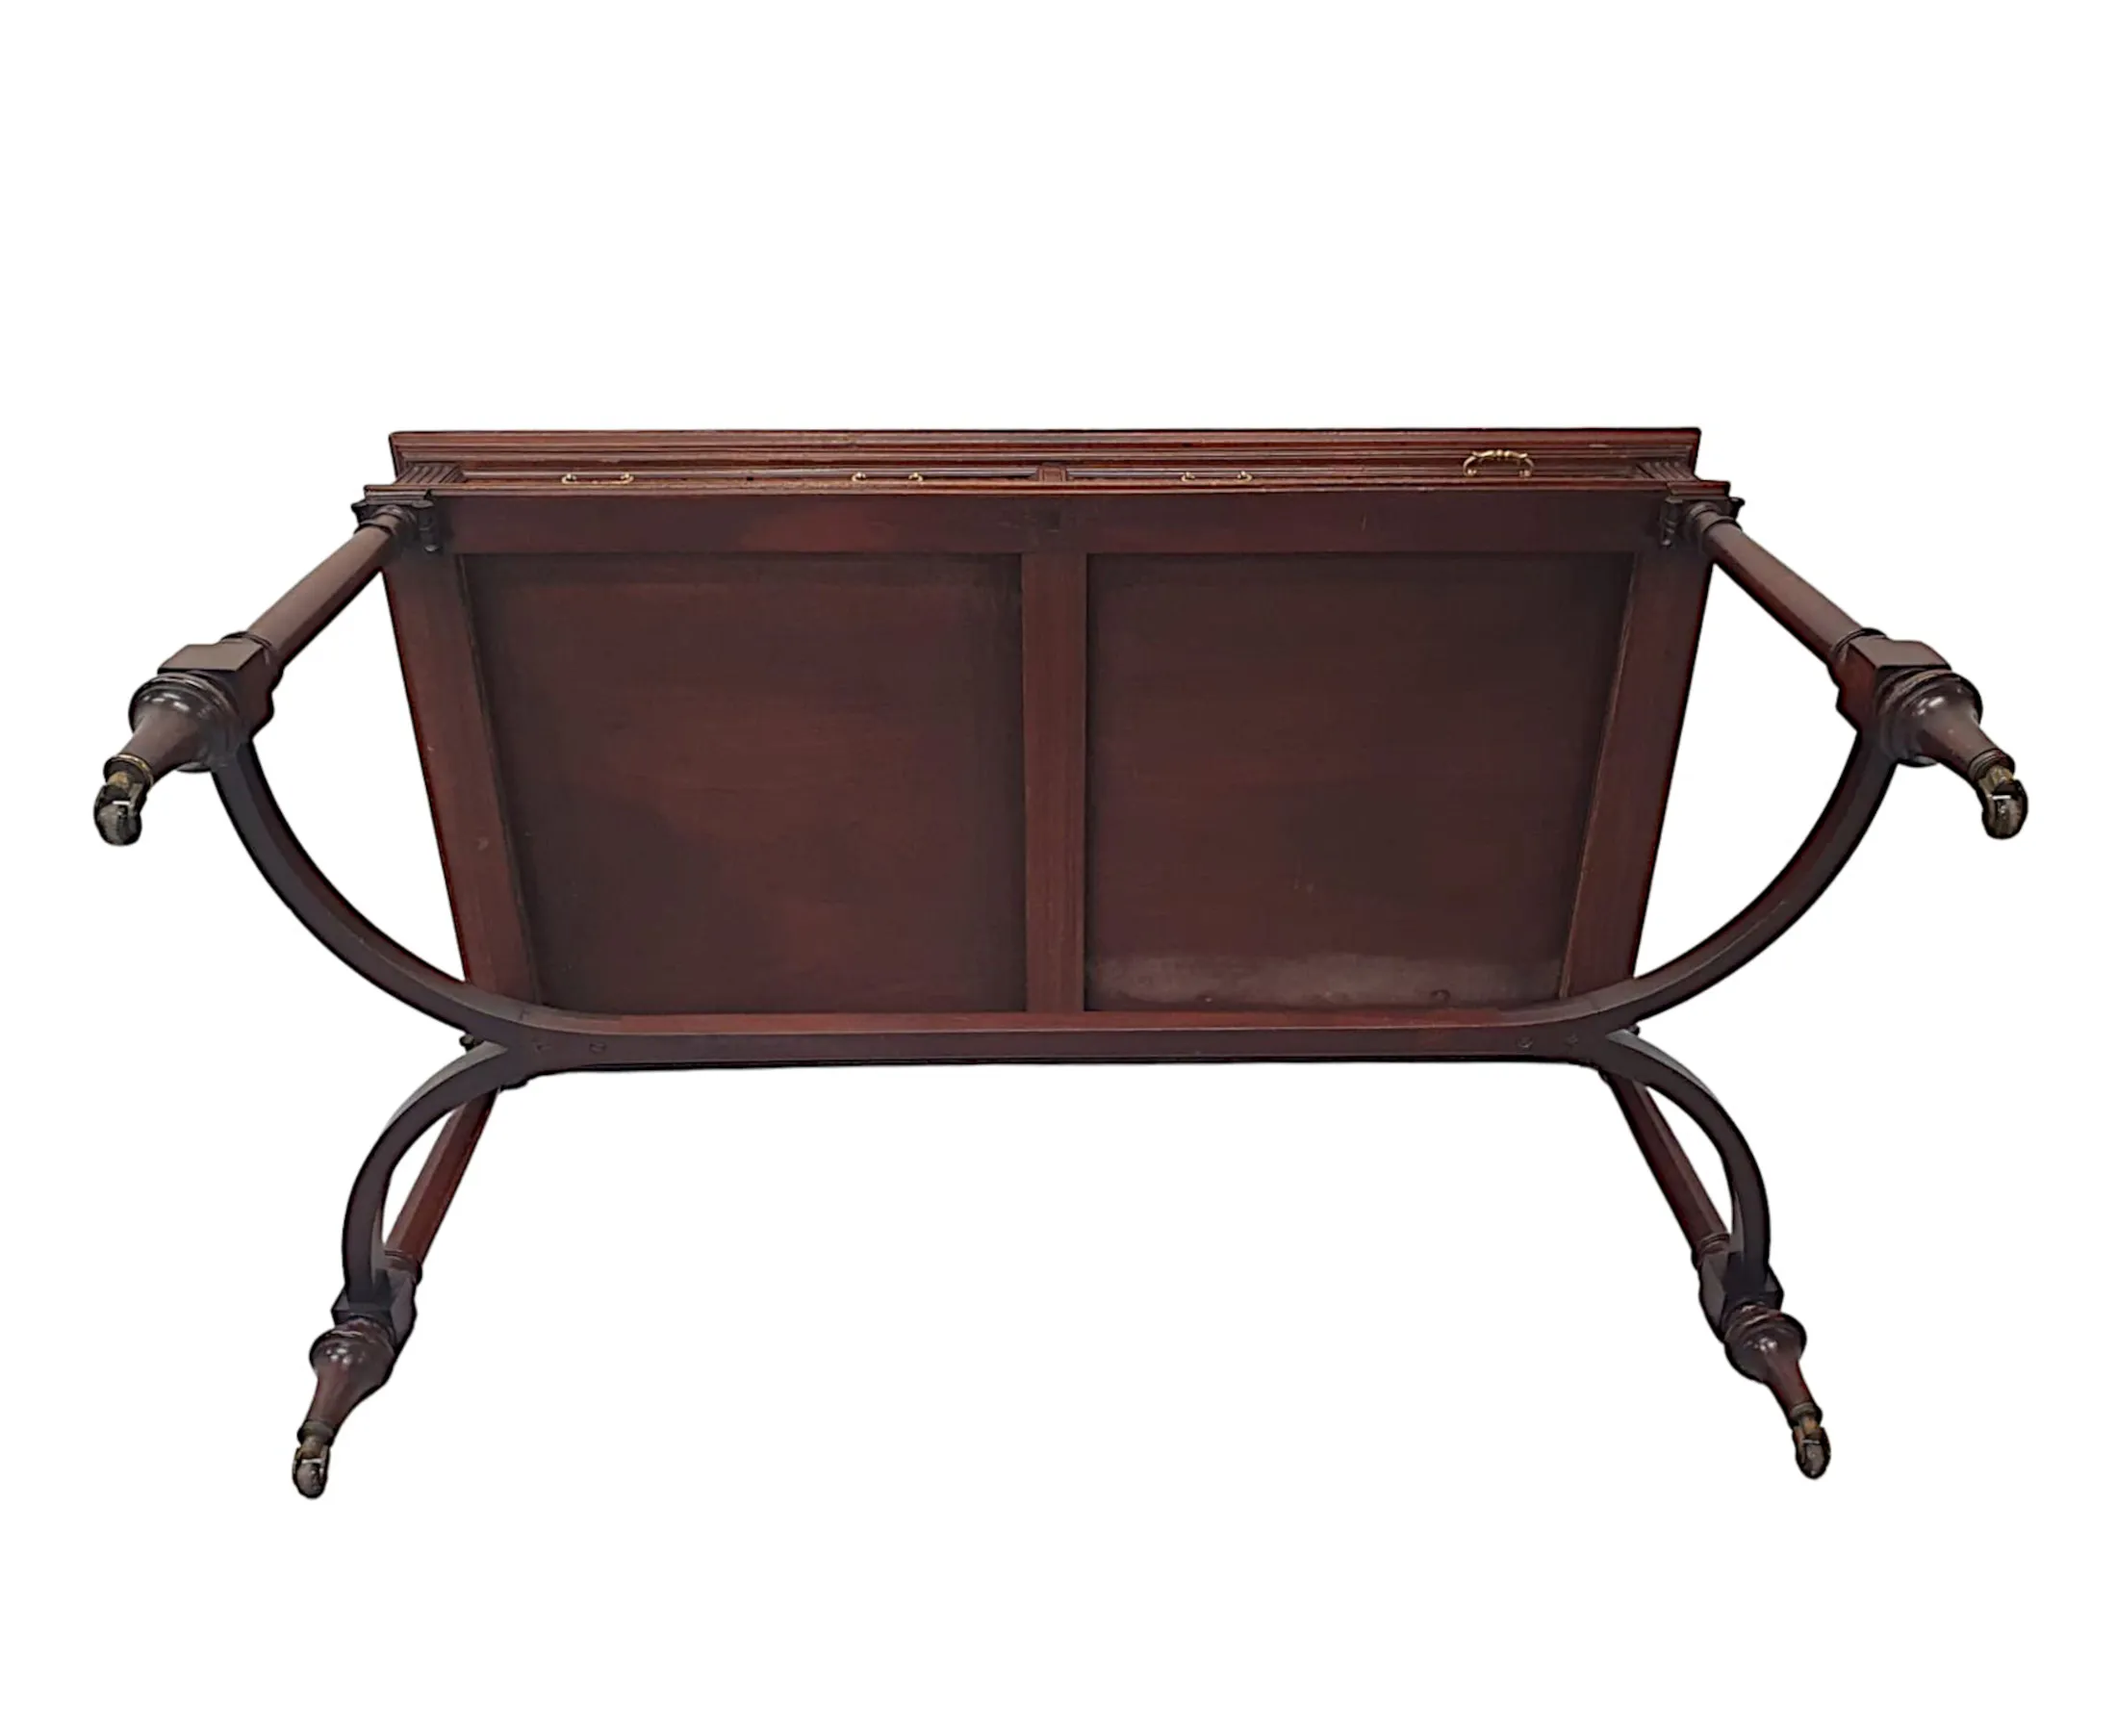 A Fine 19th Century Inlaid Mahogany Sideboard or Hall Table